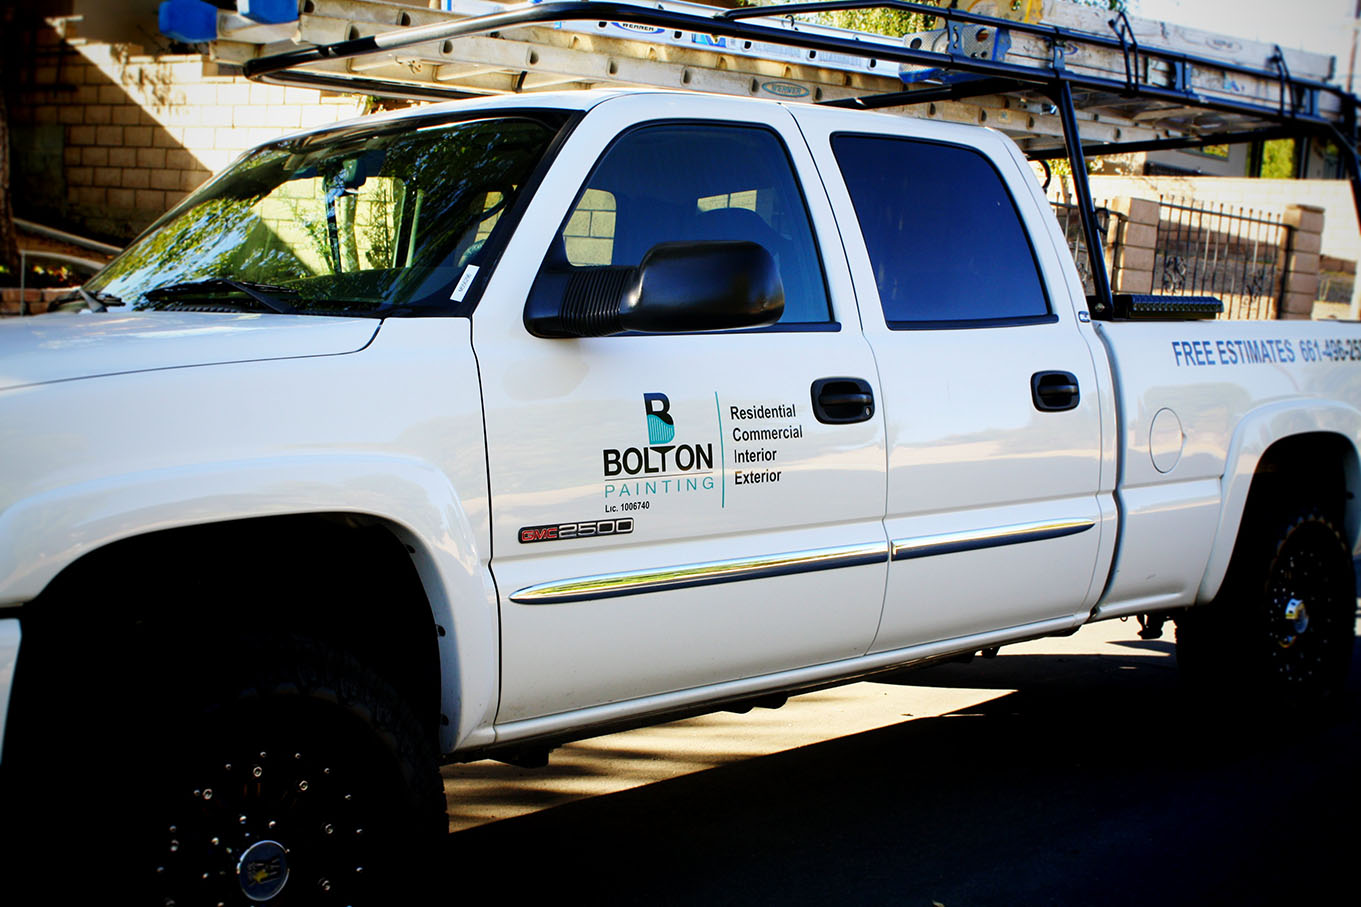 Bolton Painting logo applied